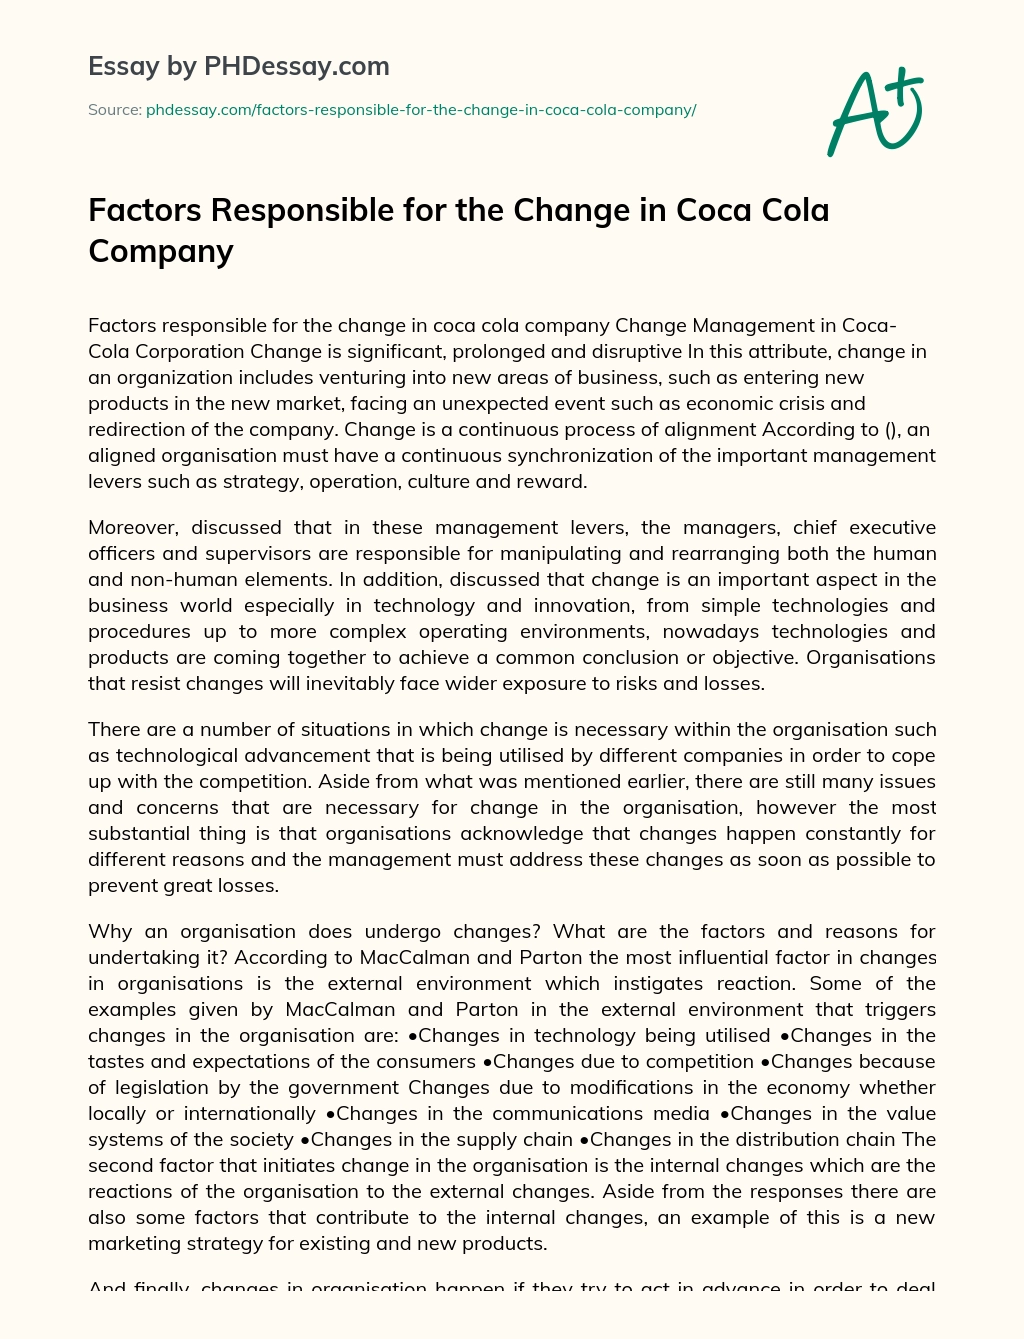 Factors Responsible for the Change in Coca Cola Company essay